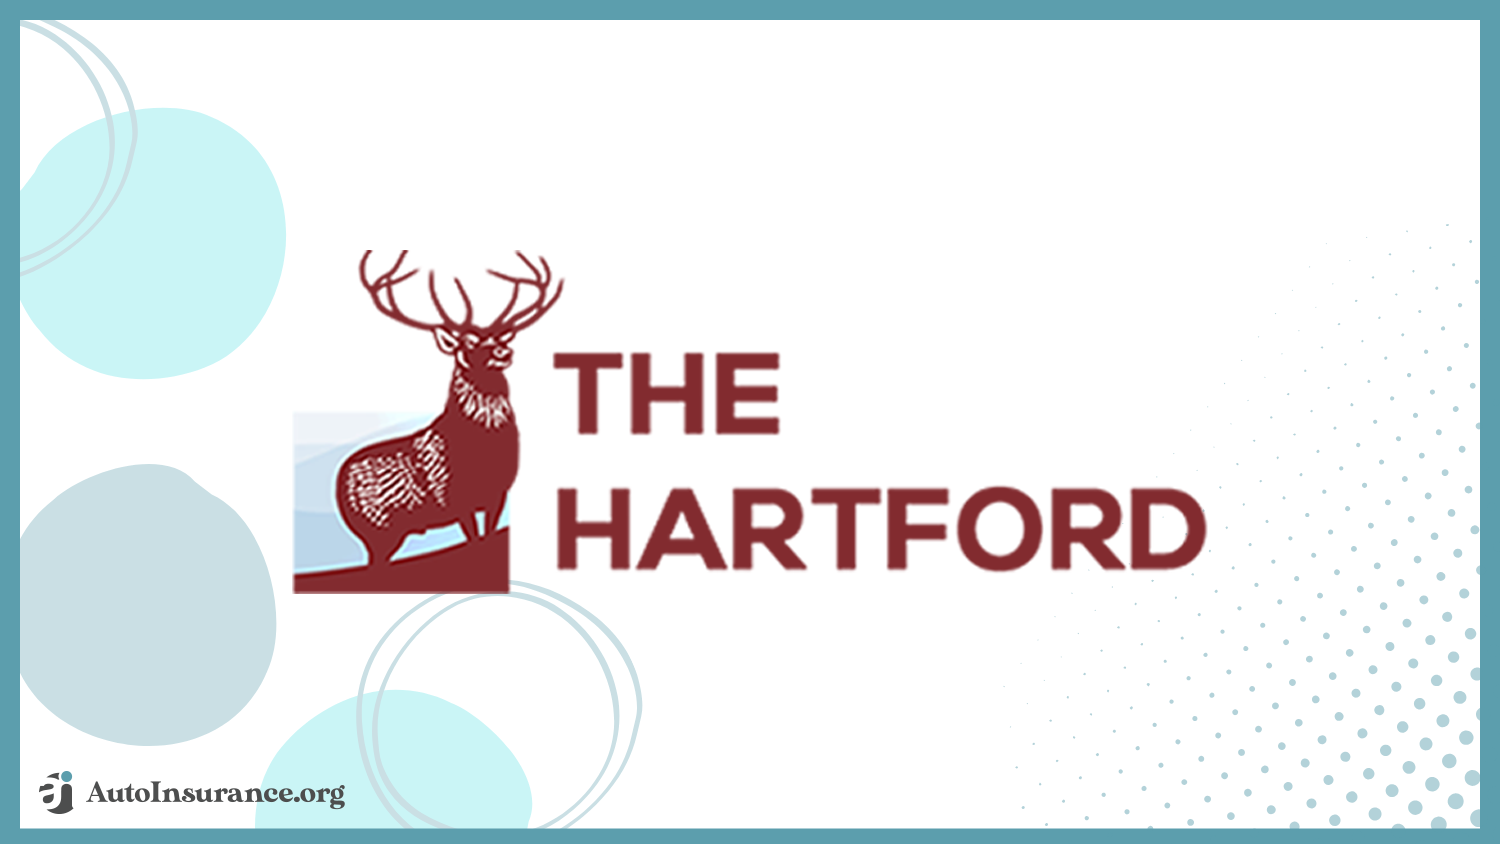 The Hartford: Best Parked Car Insurance